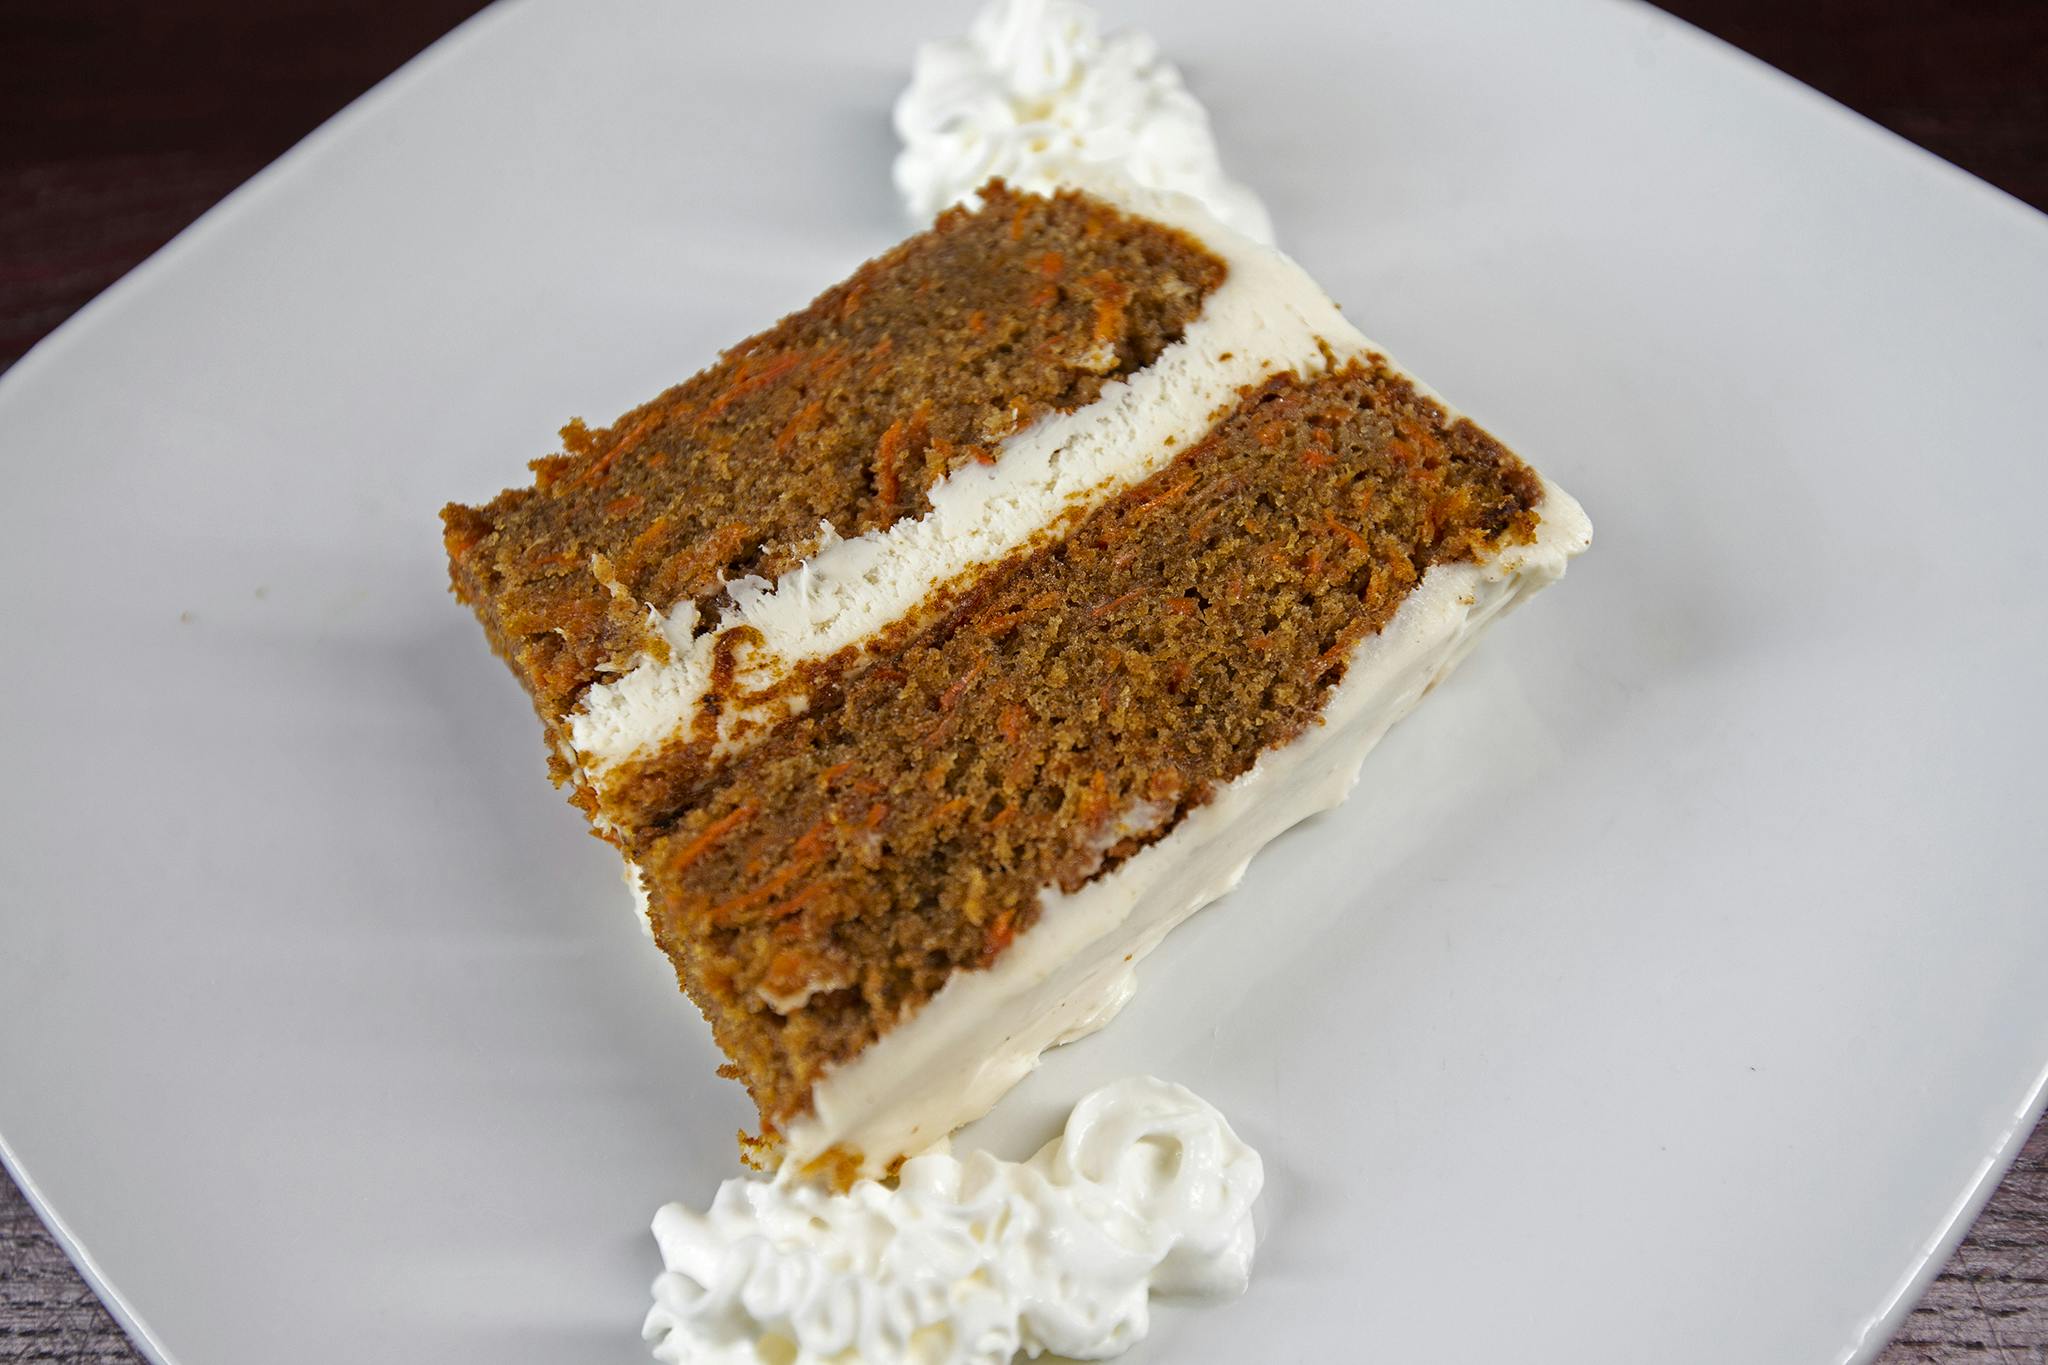 Carrot Cake from Firehouse Grill - Chicago Ave in Evanston, IL